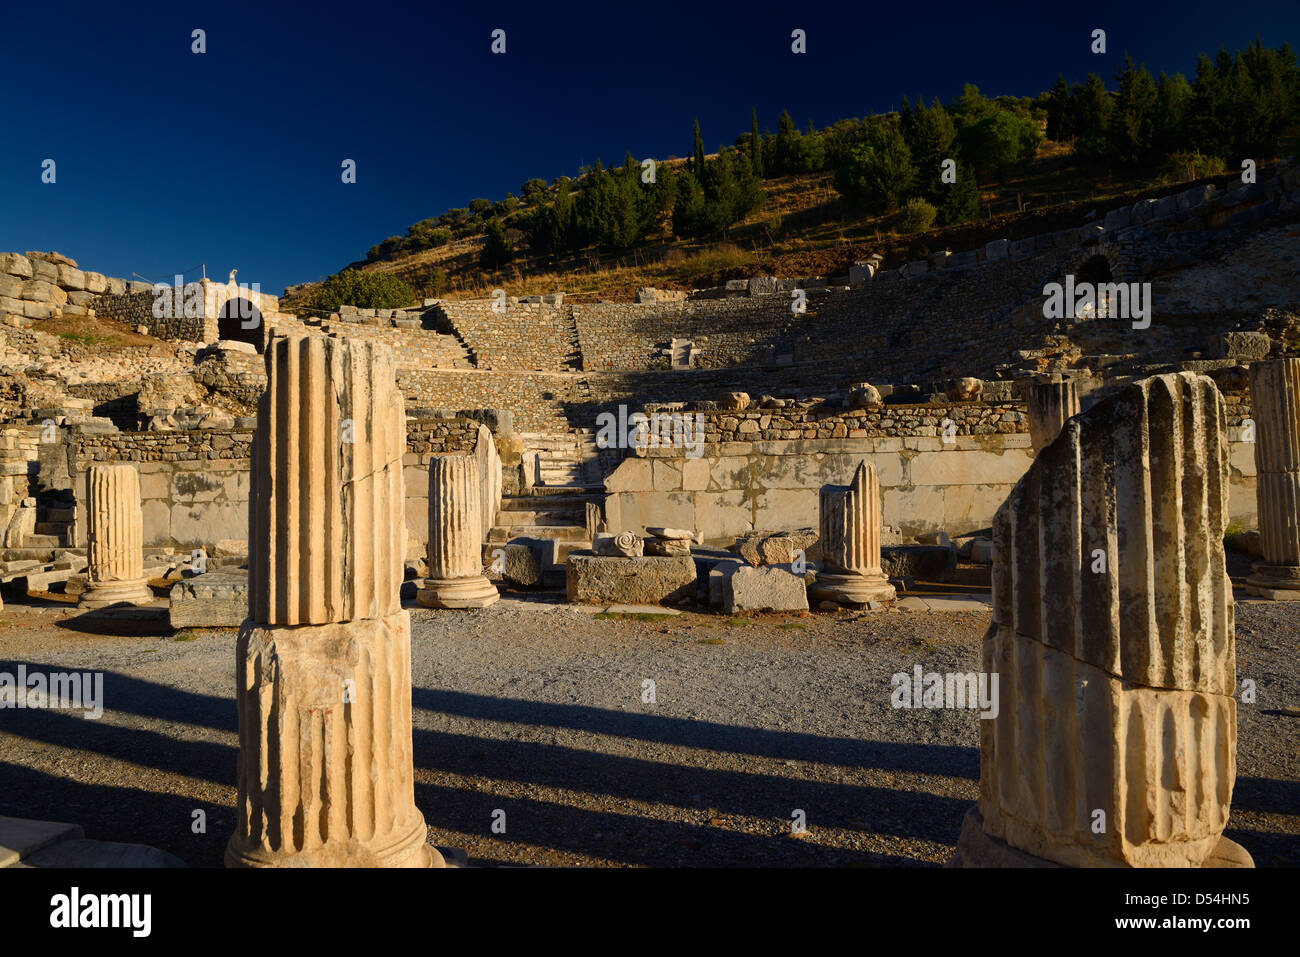 Bouleuterion for council meetings and small theatre Odeon for concerts in ancient Ephesus Turkey Stock Photo